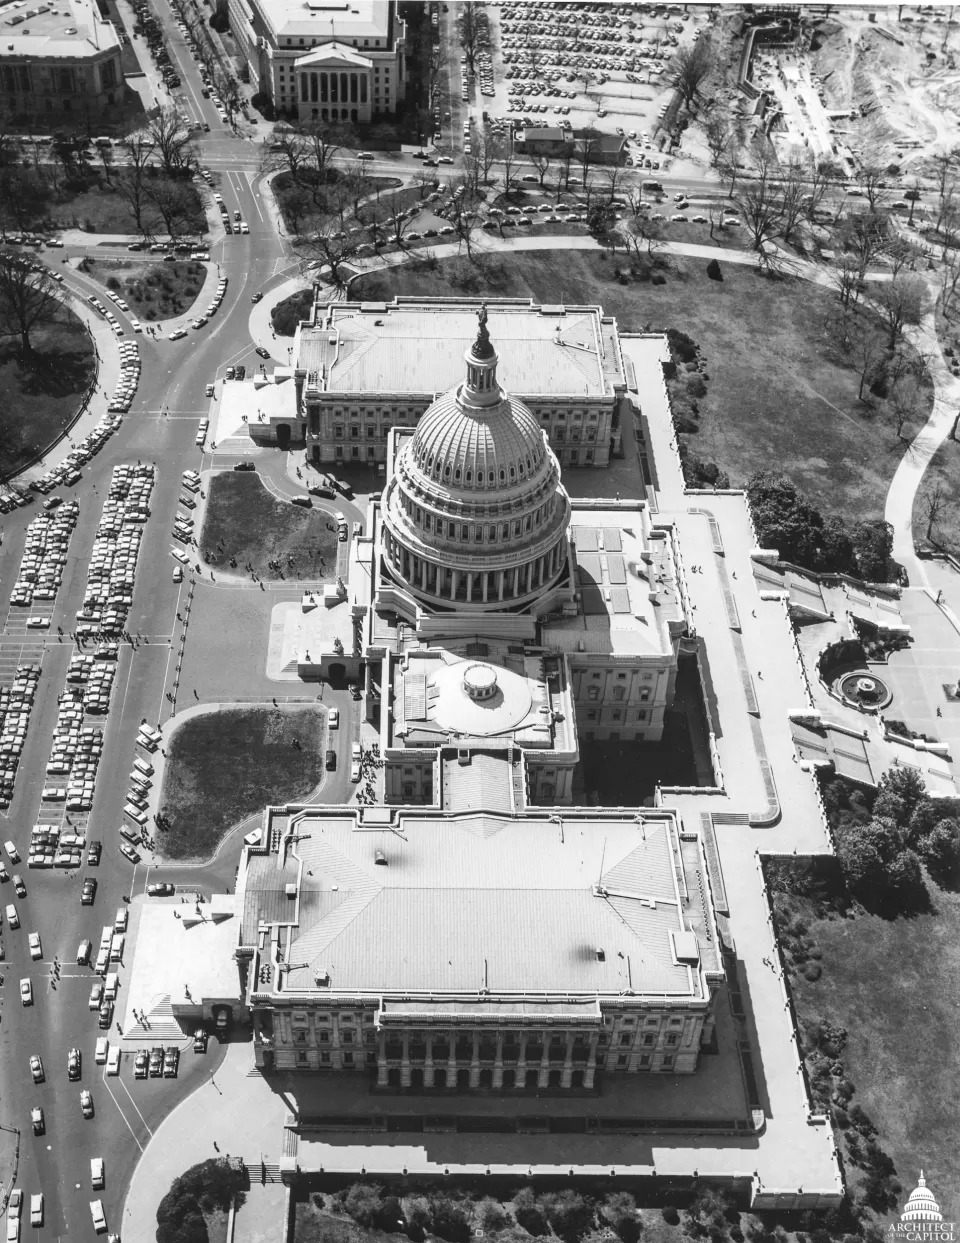 View of the U.S. Capitol before the courtyards were transformed into meeting rooms, offices and connecting hallways in the building’s basement level.